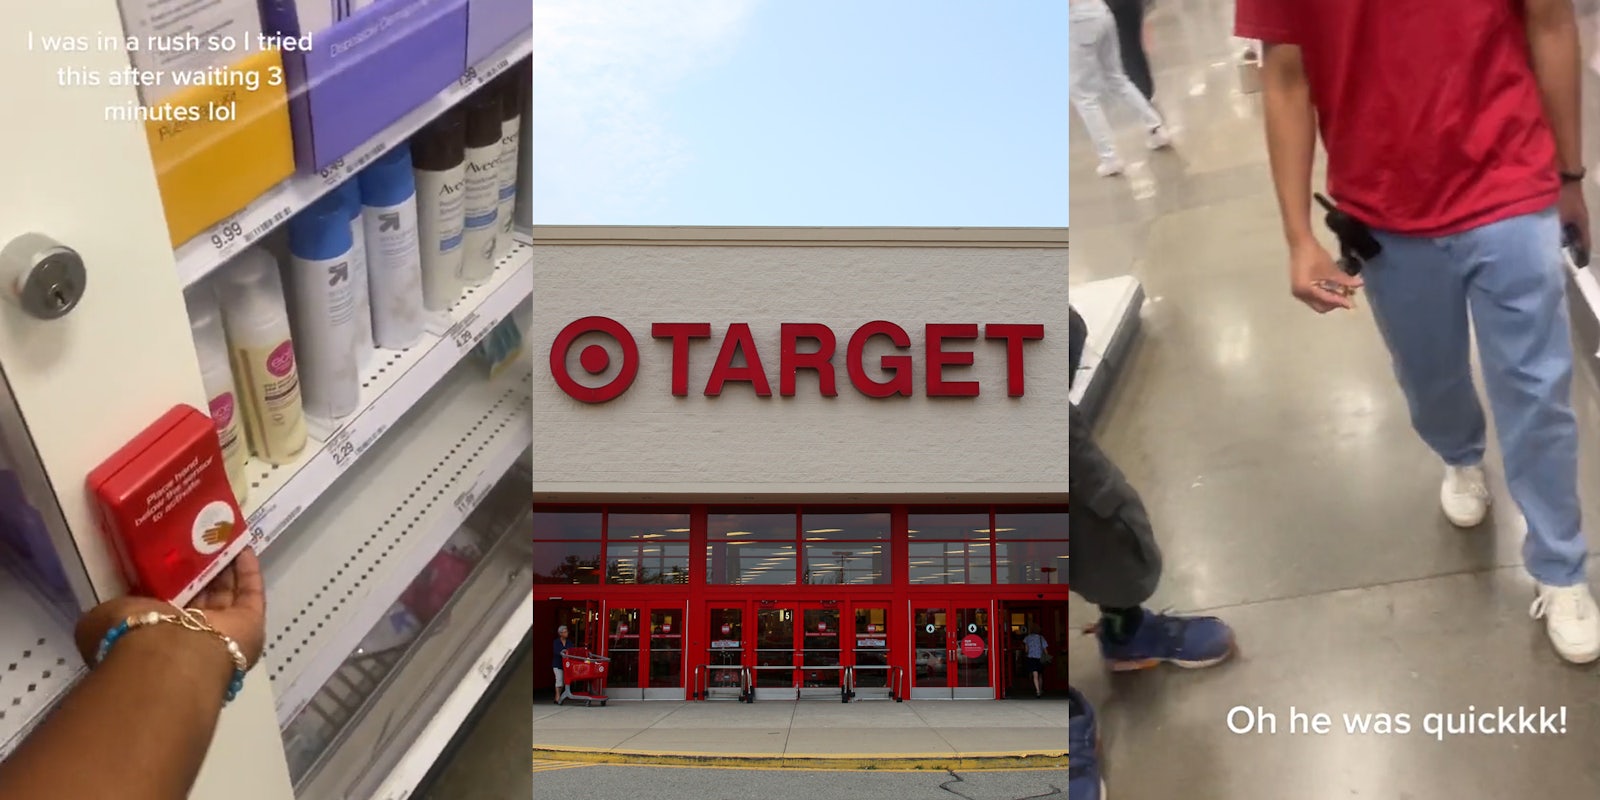 Target customer pressing button on locked shelf with caption ' I was in a rush so I tried this after waiting 3 minutes lol' (l) Target building entrance with sign (c) Target employee walking with caption 'Oh he was quickkk!' (r)